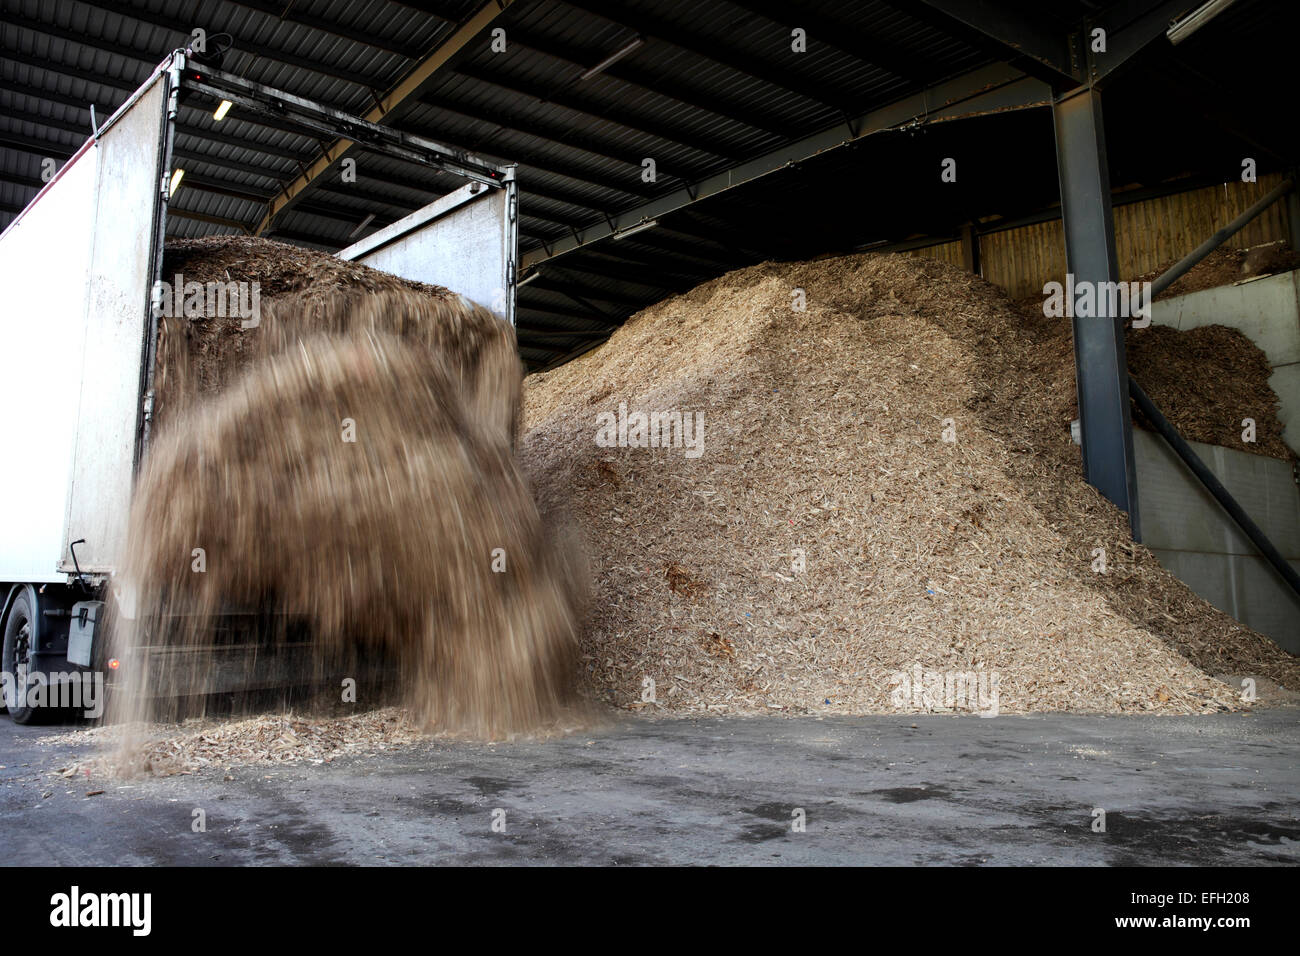 Lorry unloading forestry waste in loading bay at biomass plant Stock Photo